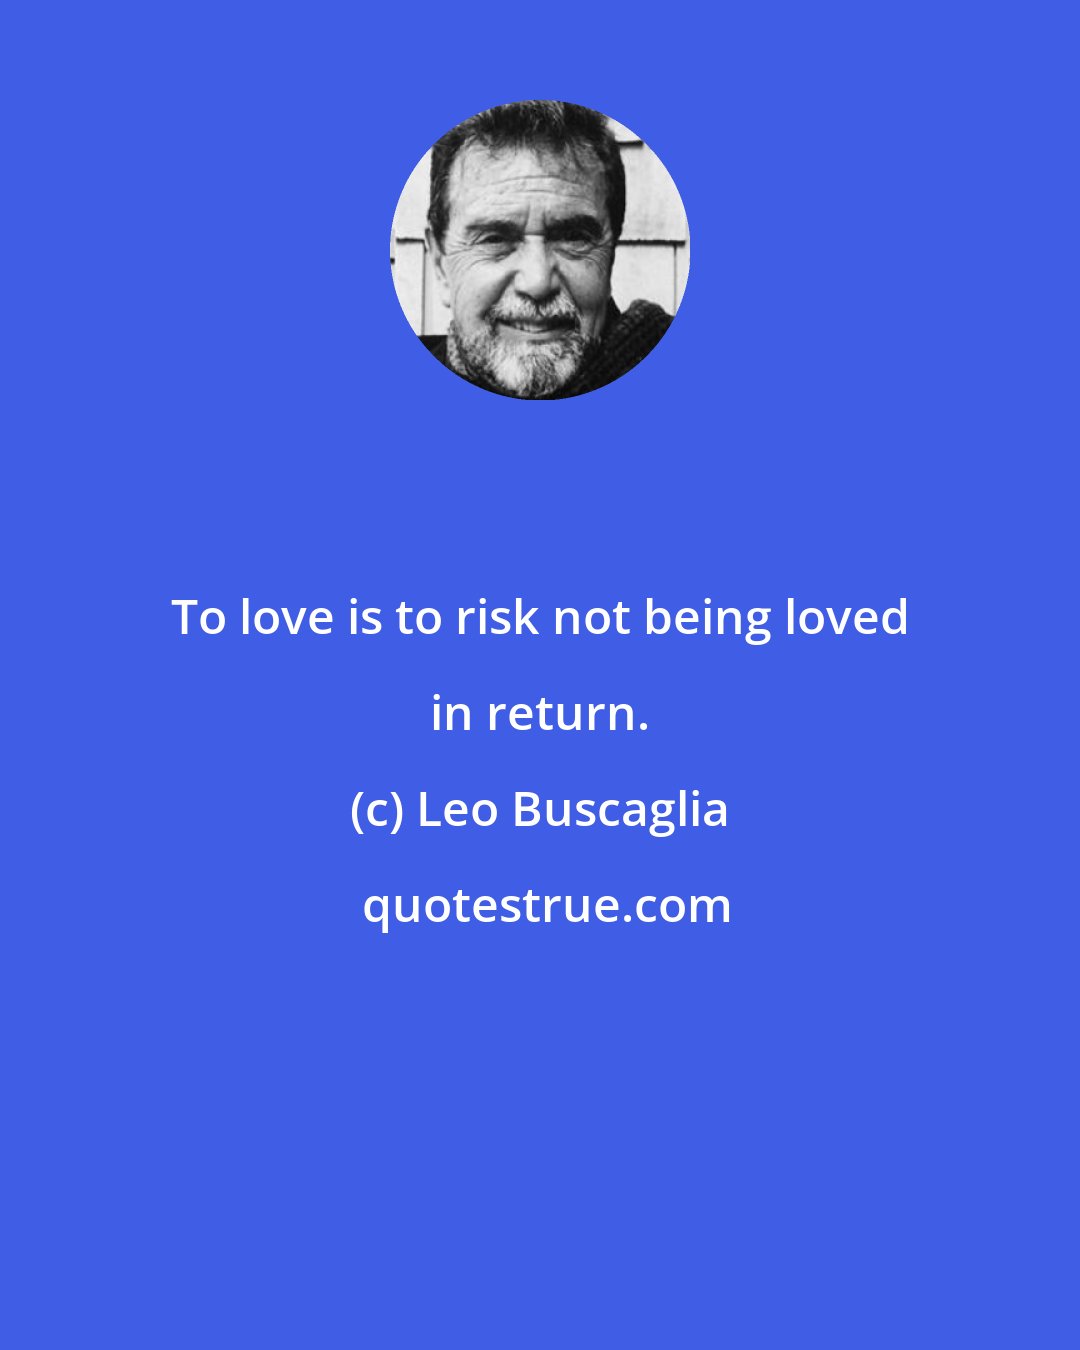 Leo Buscaglia: To love is to risk not being loved in return.